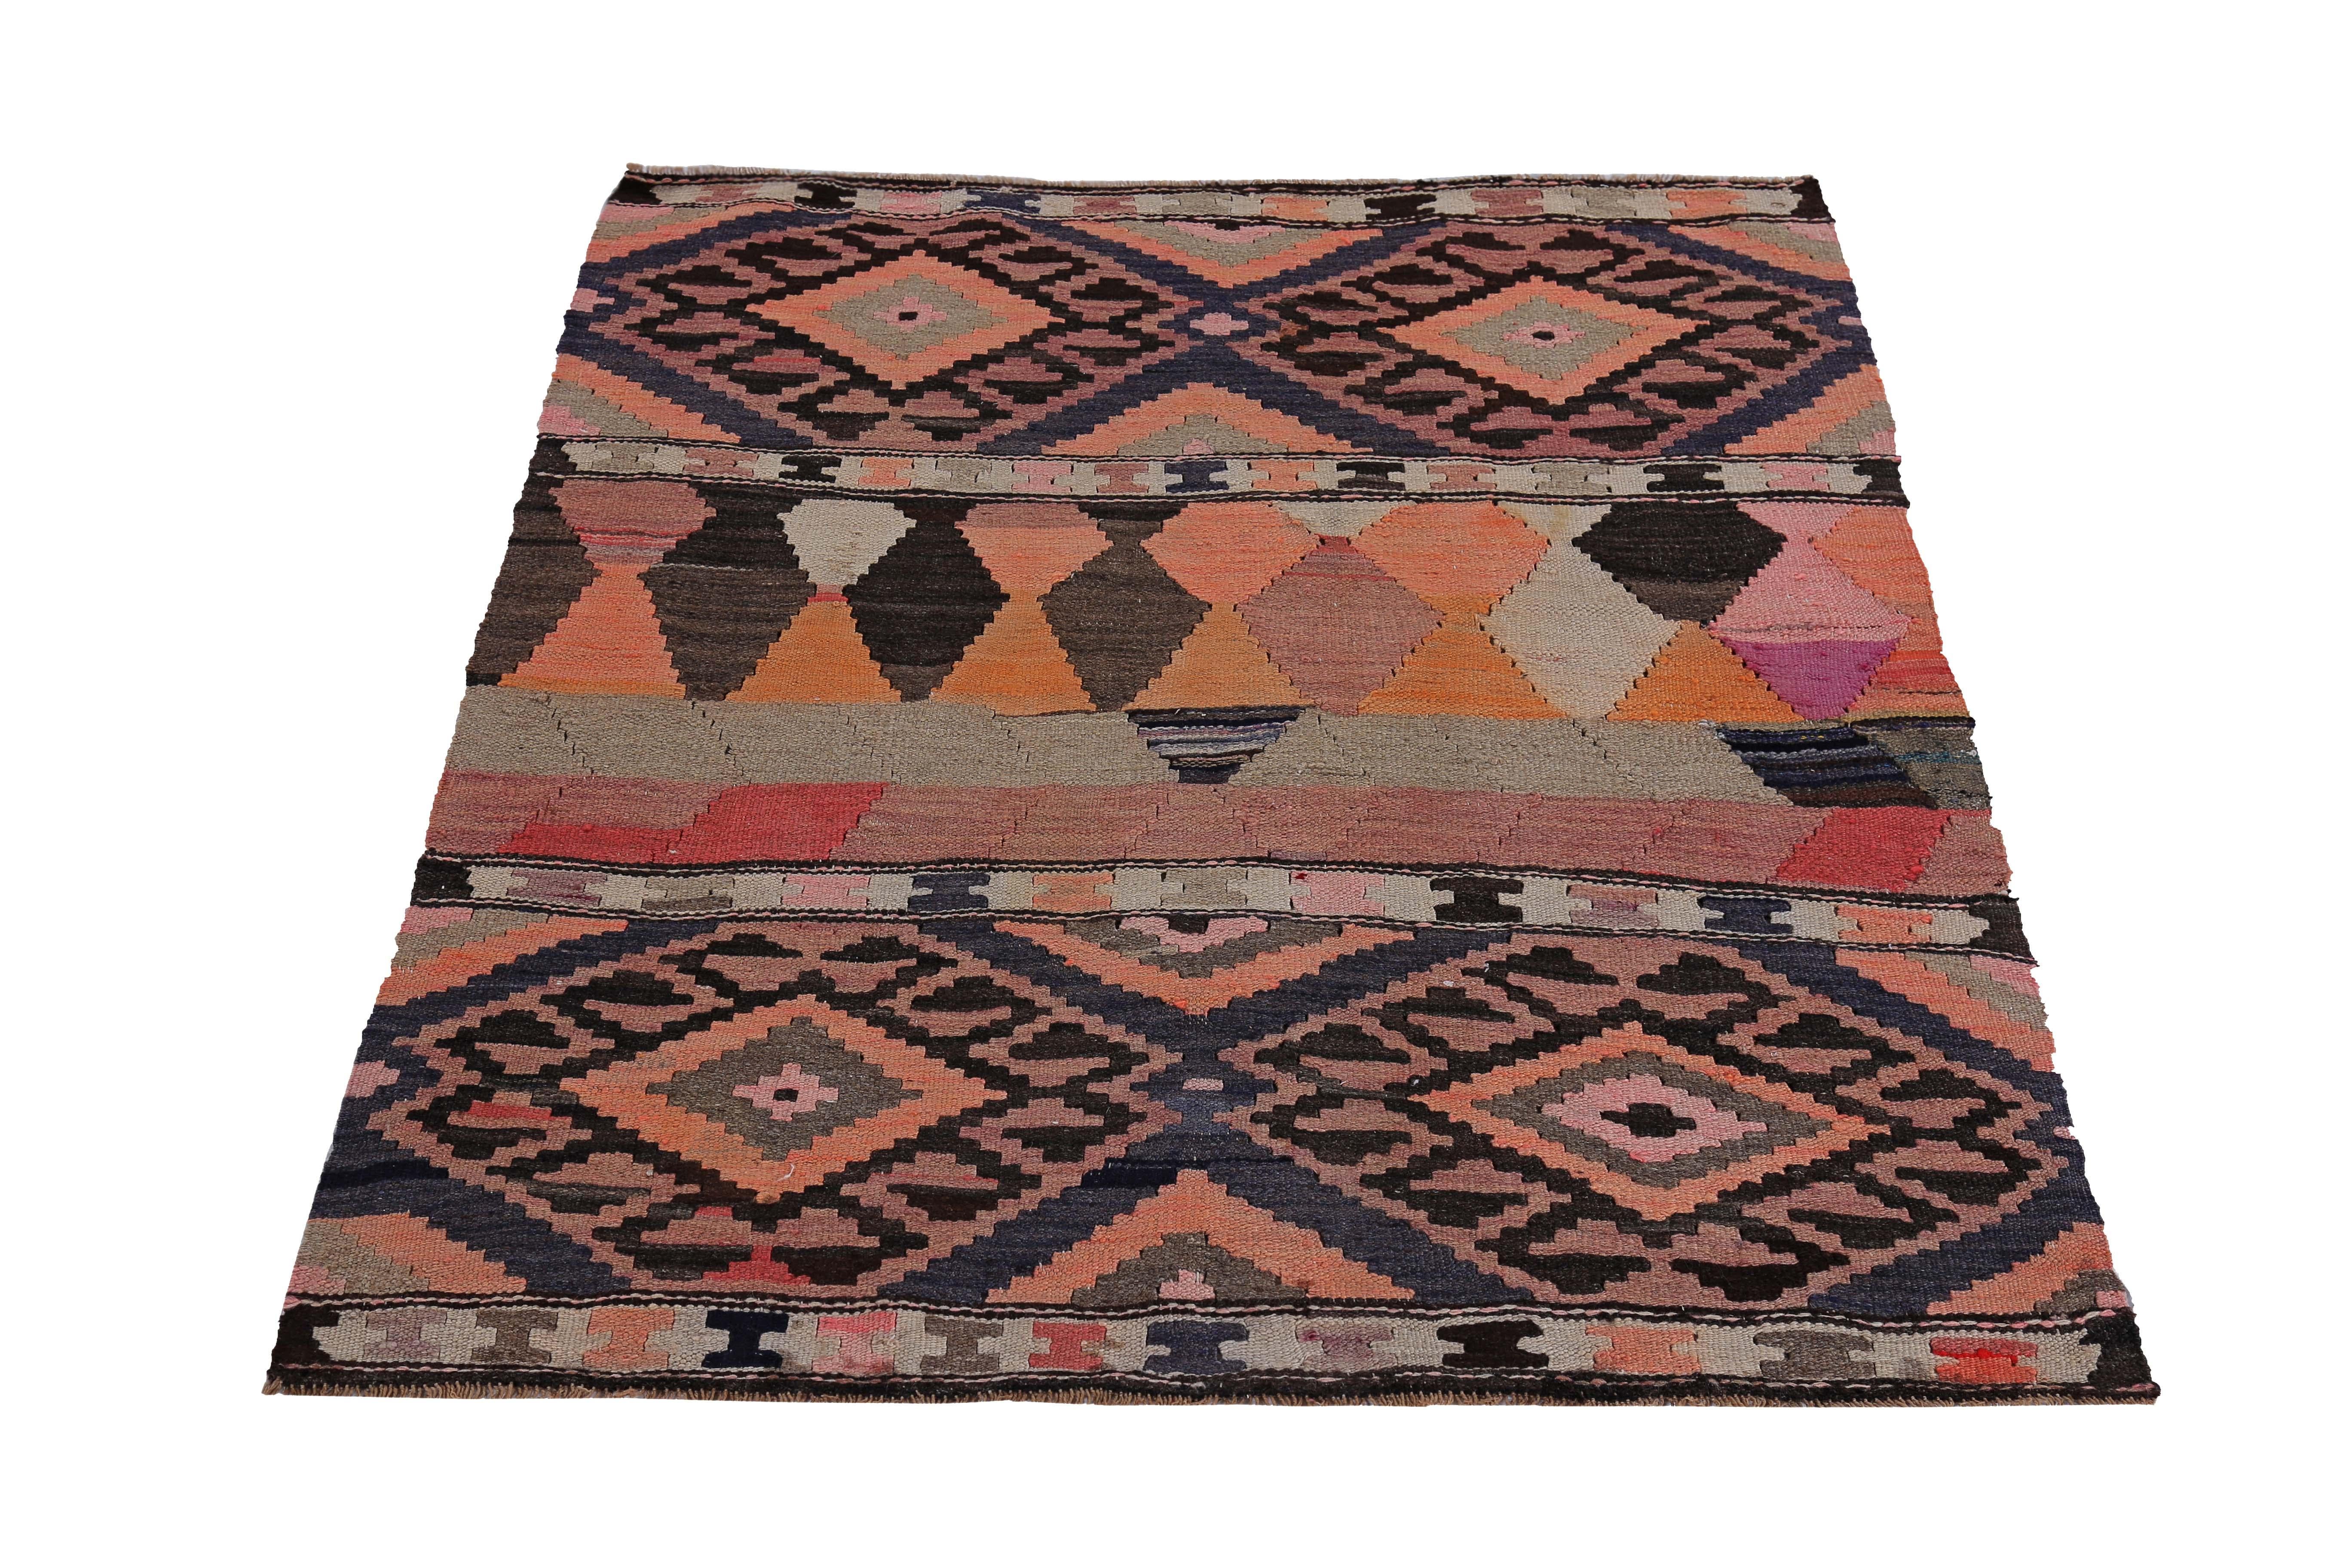 Turkish rug handwoven from the finest sheep’s wool and colored with all-natural vegetable dyes that are safe for humans and pets. It’s a traditional Kilim flat-weave design featuring orange, black, beige and brown tribal diamond patterns on a black